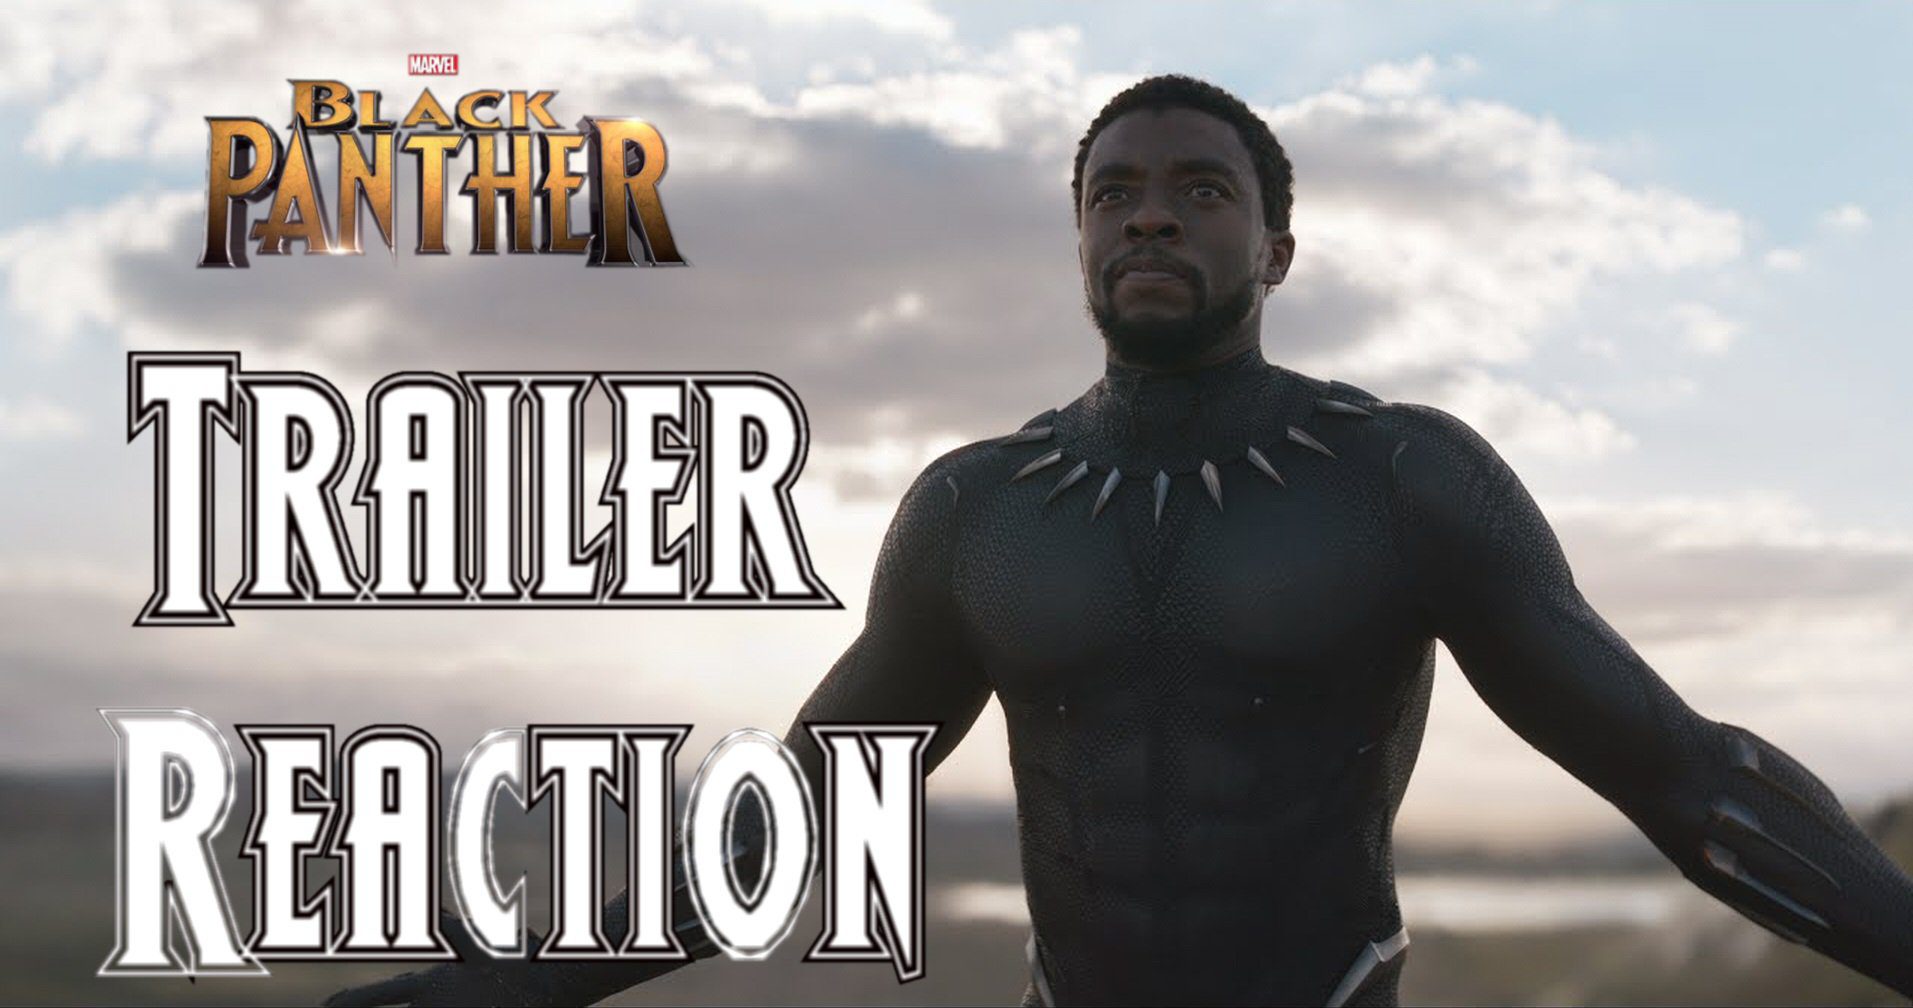 Black Panther Trailer Reaction and Breakdown